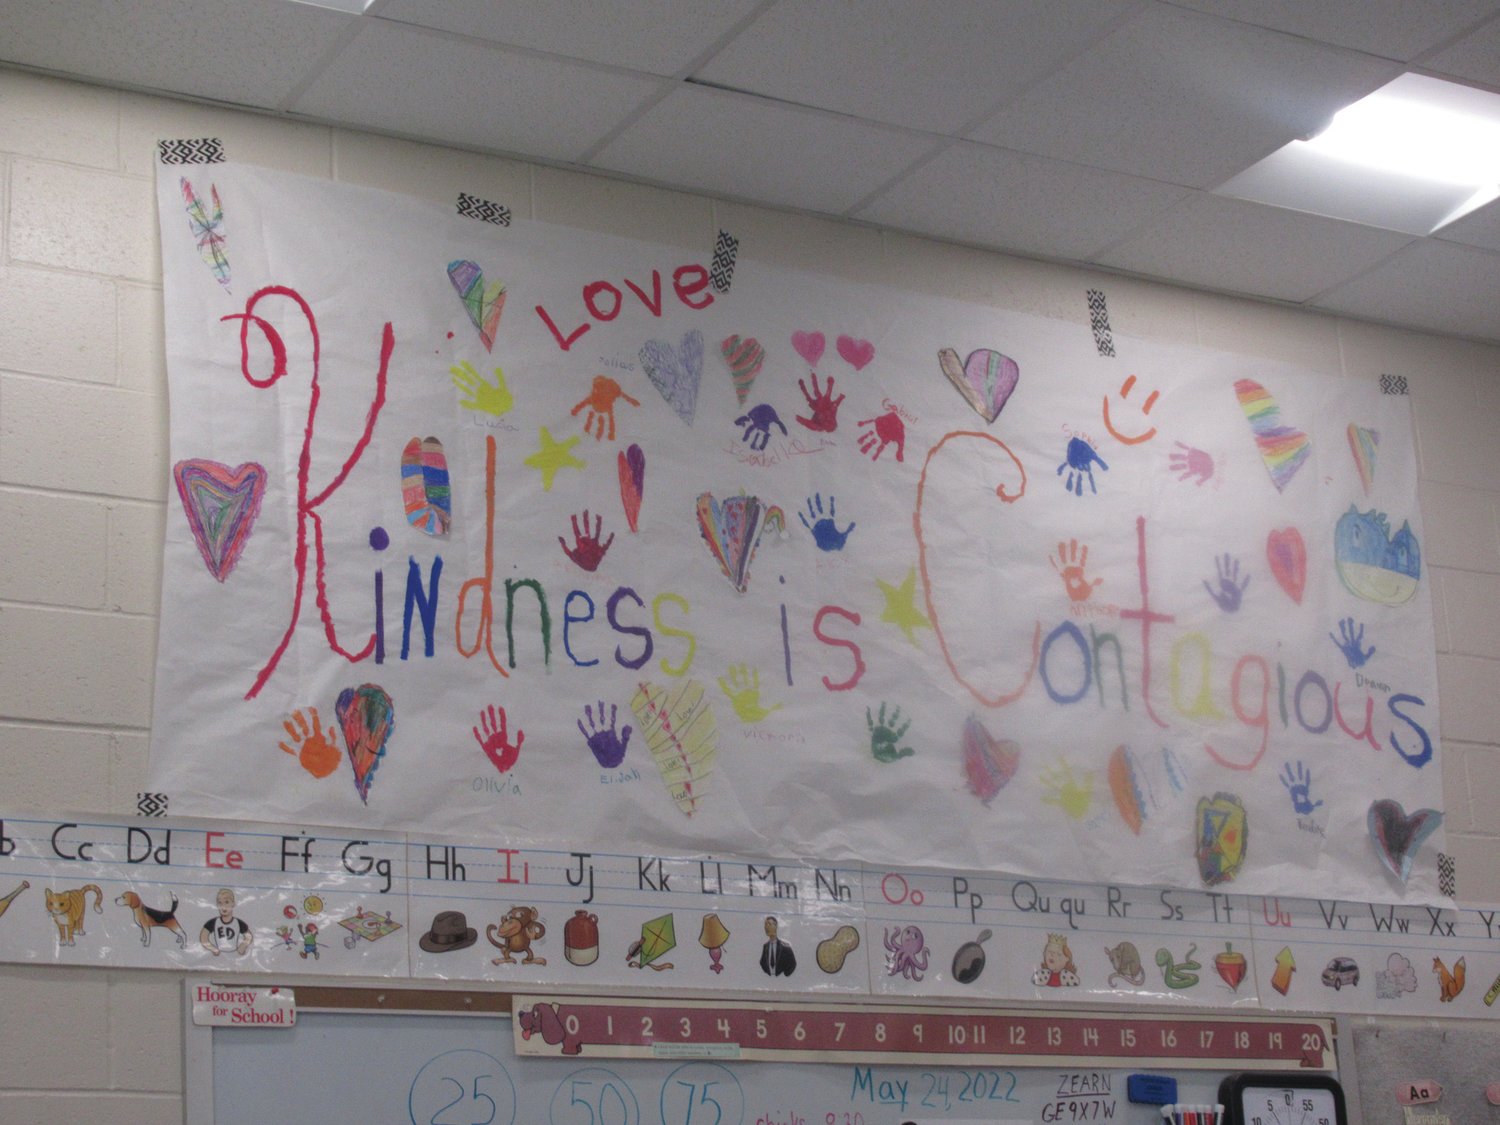 SUPER SPECIAL SLOGAN: The words “Kindness is contagious” on this huge handmade wall-hanging describe the lessons children in ECC Teacher Linda Greco’s classroom have been learning in recent months.